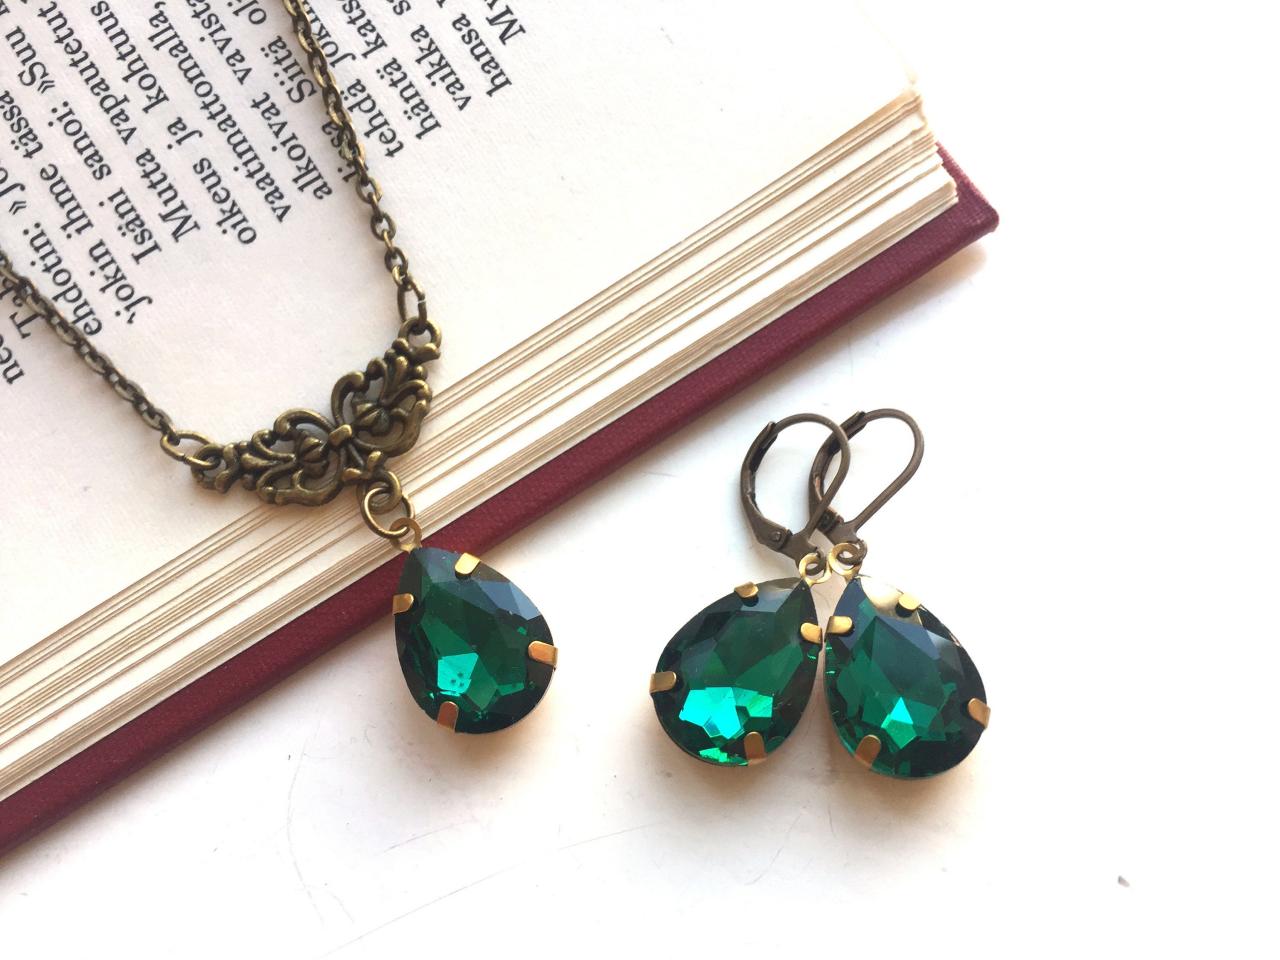 Vintage Inspired Emerald Green Jewel Necklace And Earrings Set, Selma Dreams